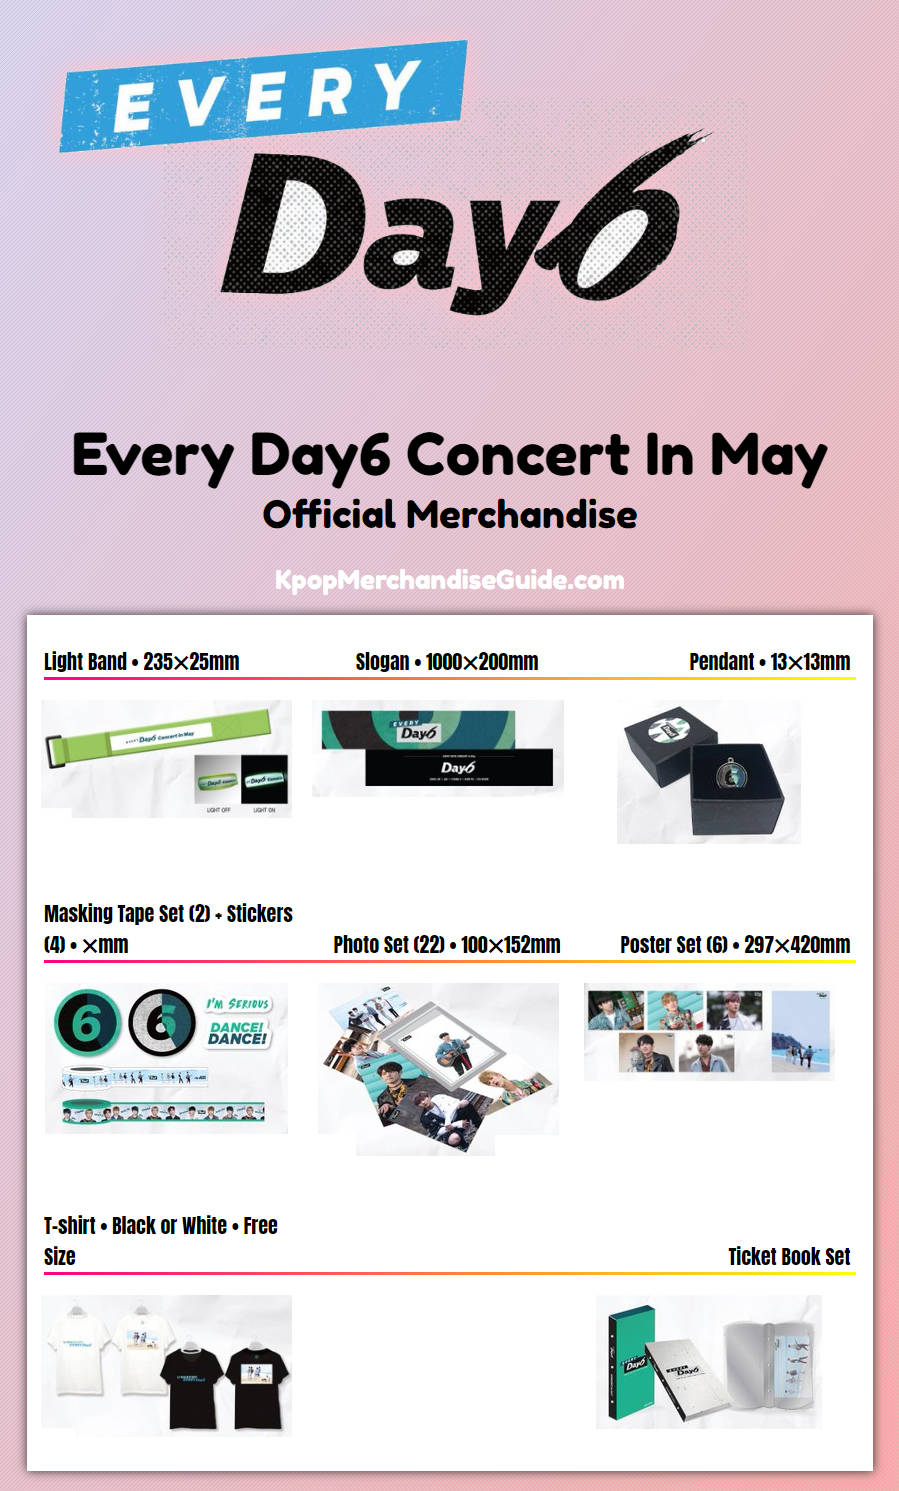 Every Day6 Concert In May Merchandise